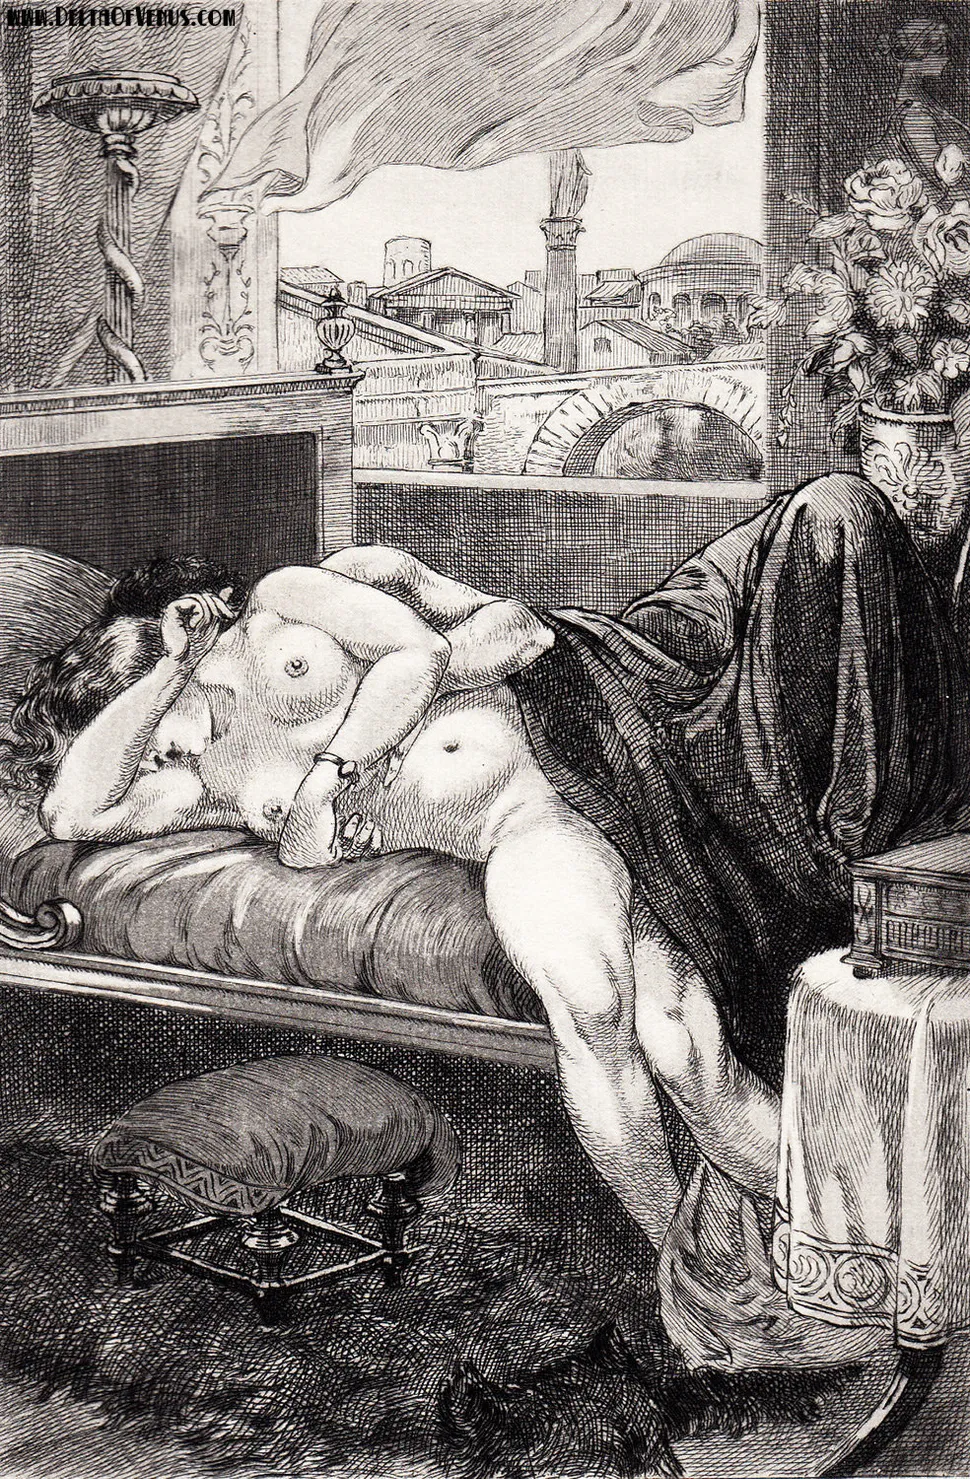 Dive Into The Fantasies Of An Obscure 19th Century Erotic Illustrator  (NSFW) | HuffPost Entertainment